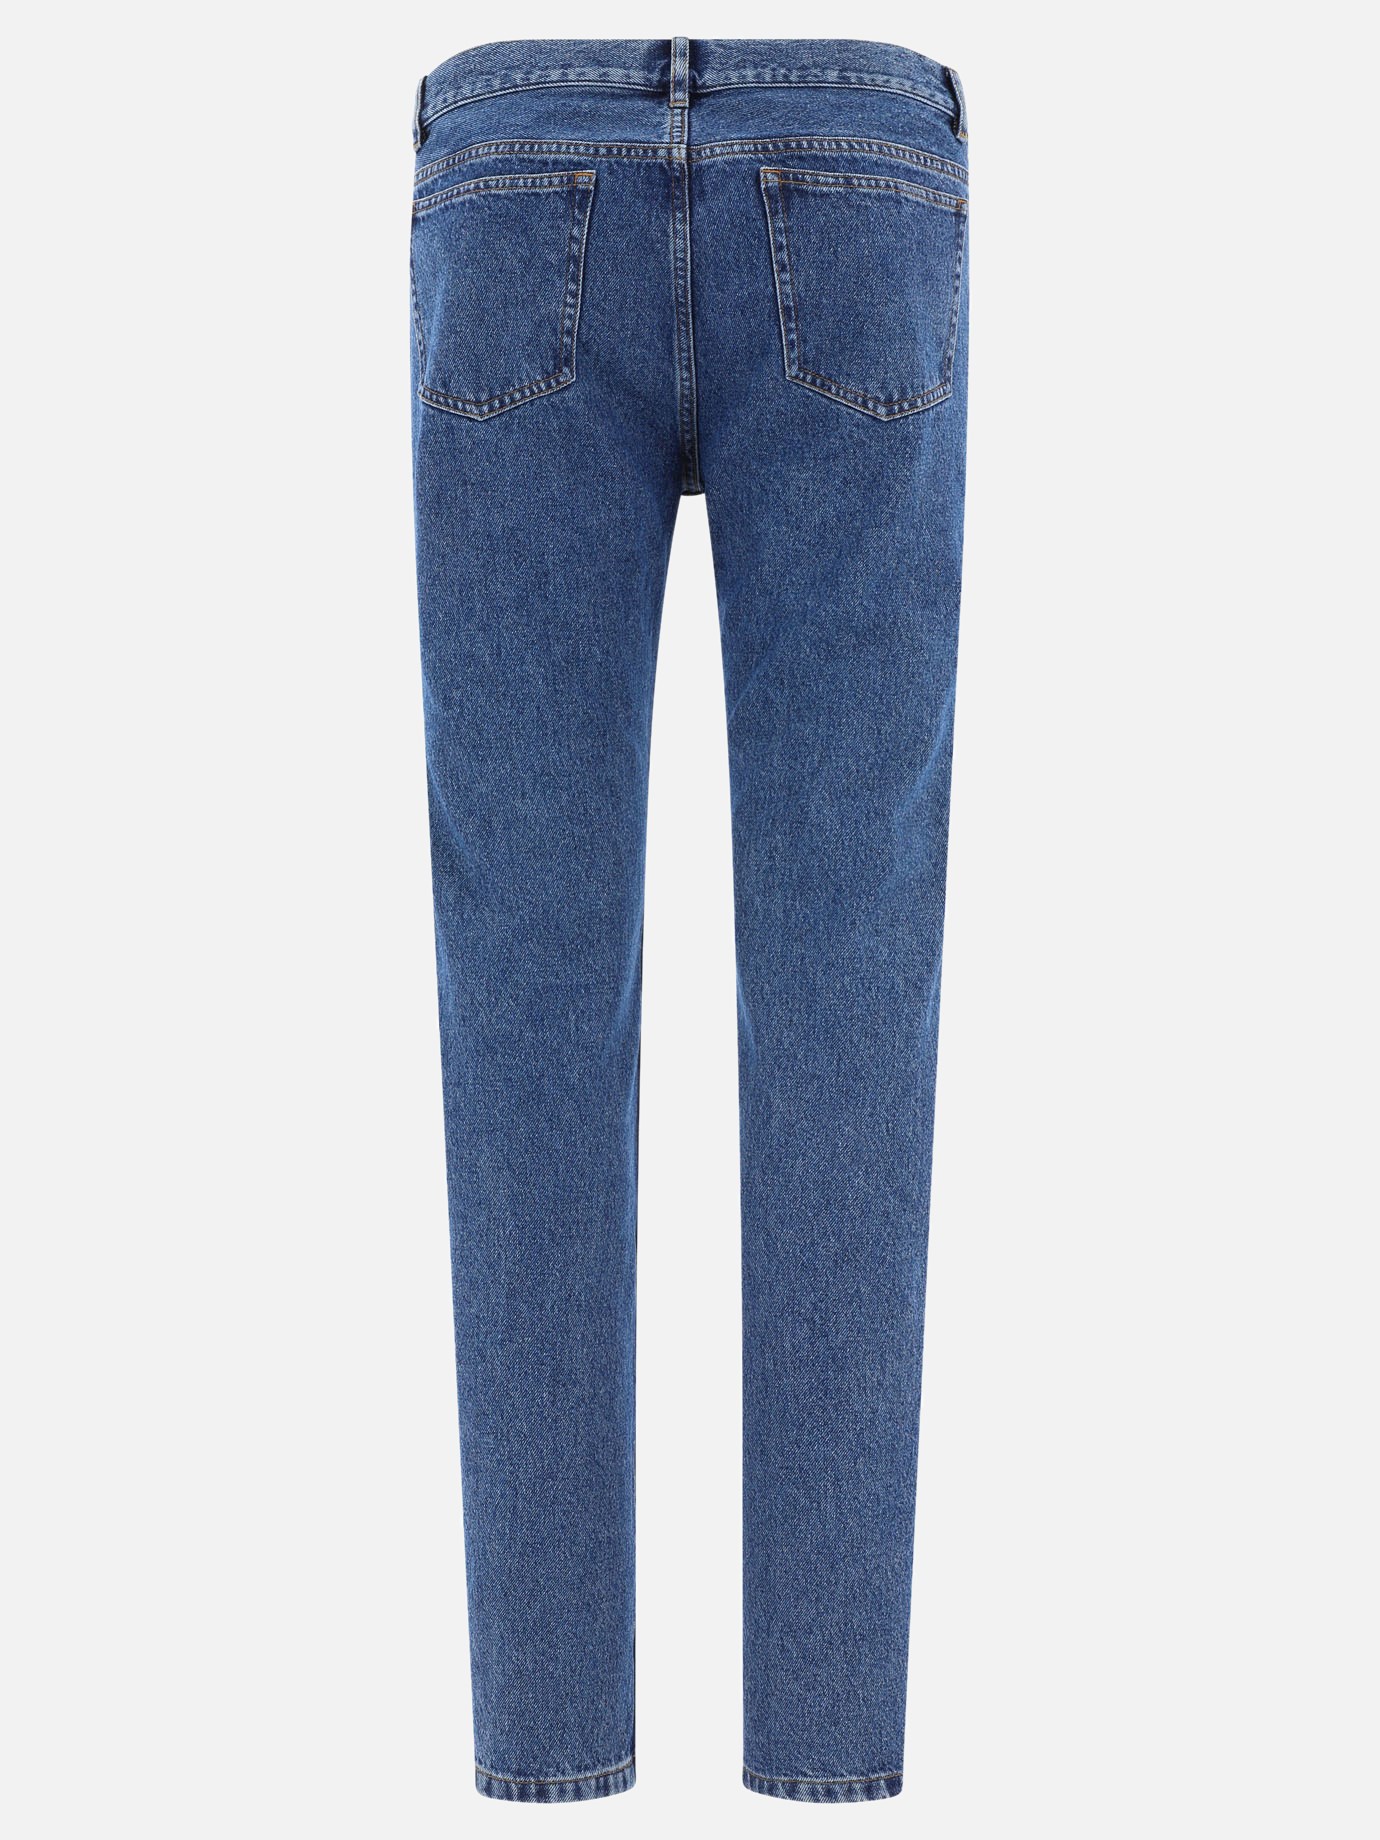  New Standard  jeans by A.P.C.